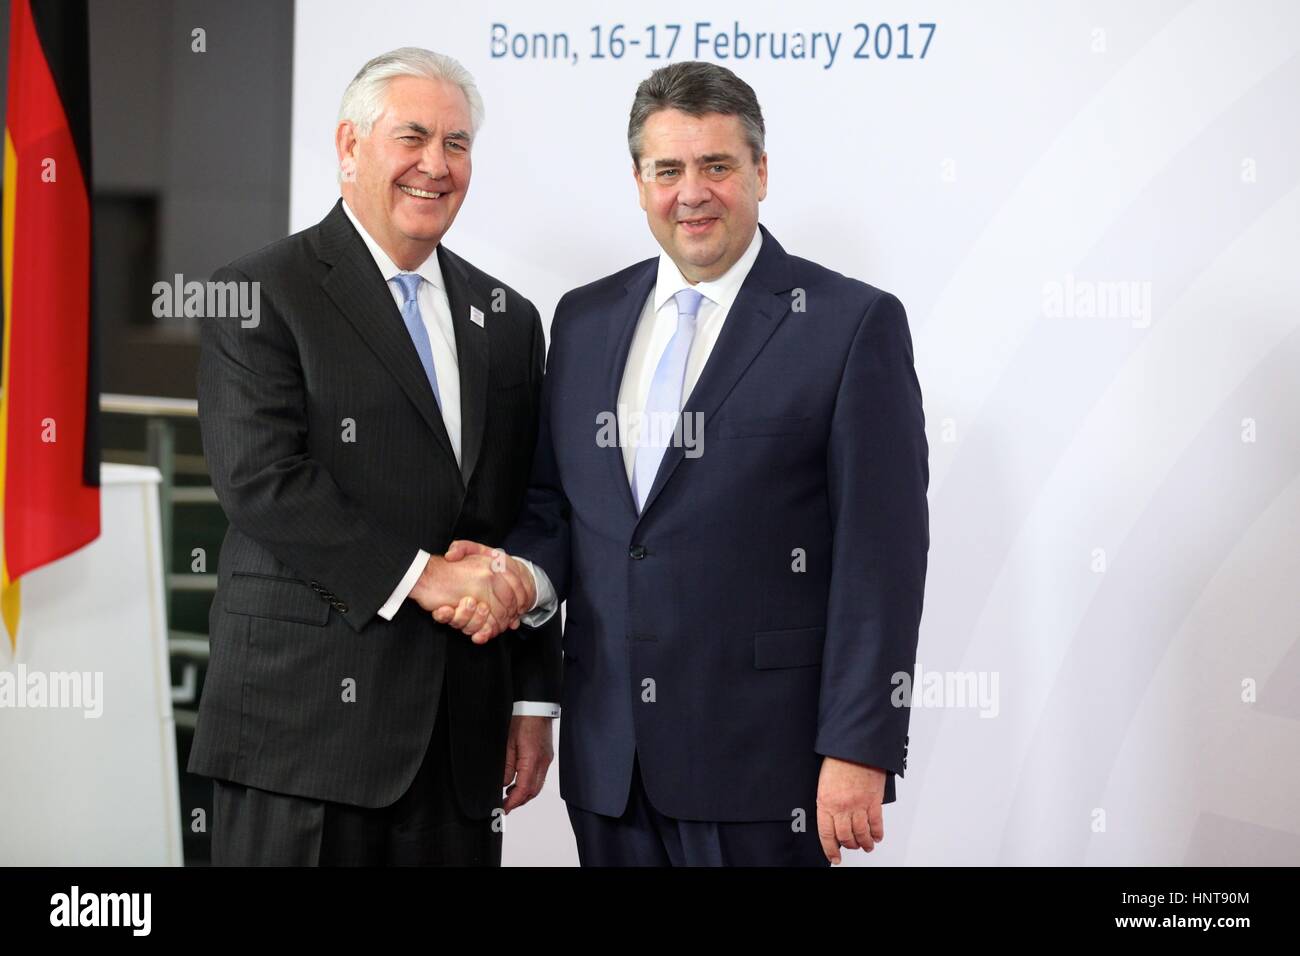 Bonn, Germany. 16th Feb, 2017. U.S. Secretary of State Rex Tillerson is welcomed by German Foreign Minister Sigmar Gabriel at the G-20 Foreign Ministers meeting February 16, 2017 in Bonn, Germany. The trip to Bonn is the first for Tillerson as Secretary of State.Credit: Planetpix/Alamy Live News Stock Photo